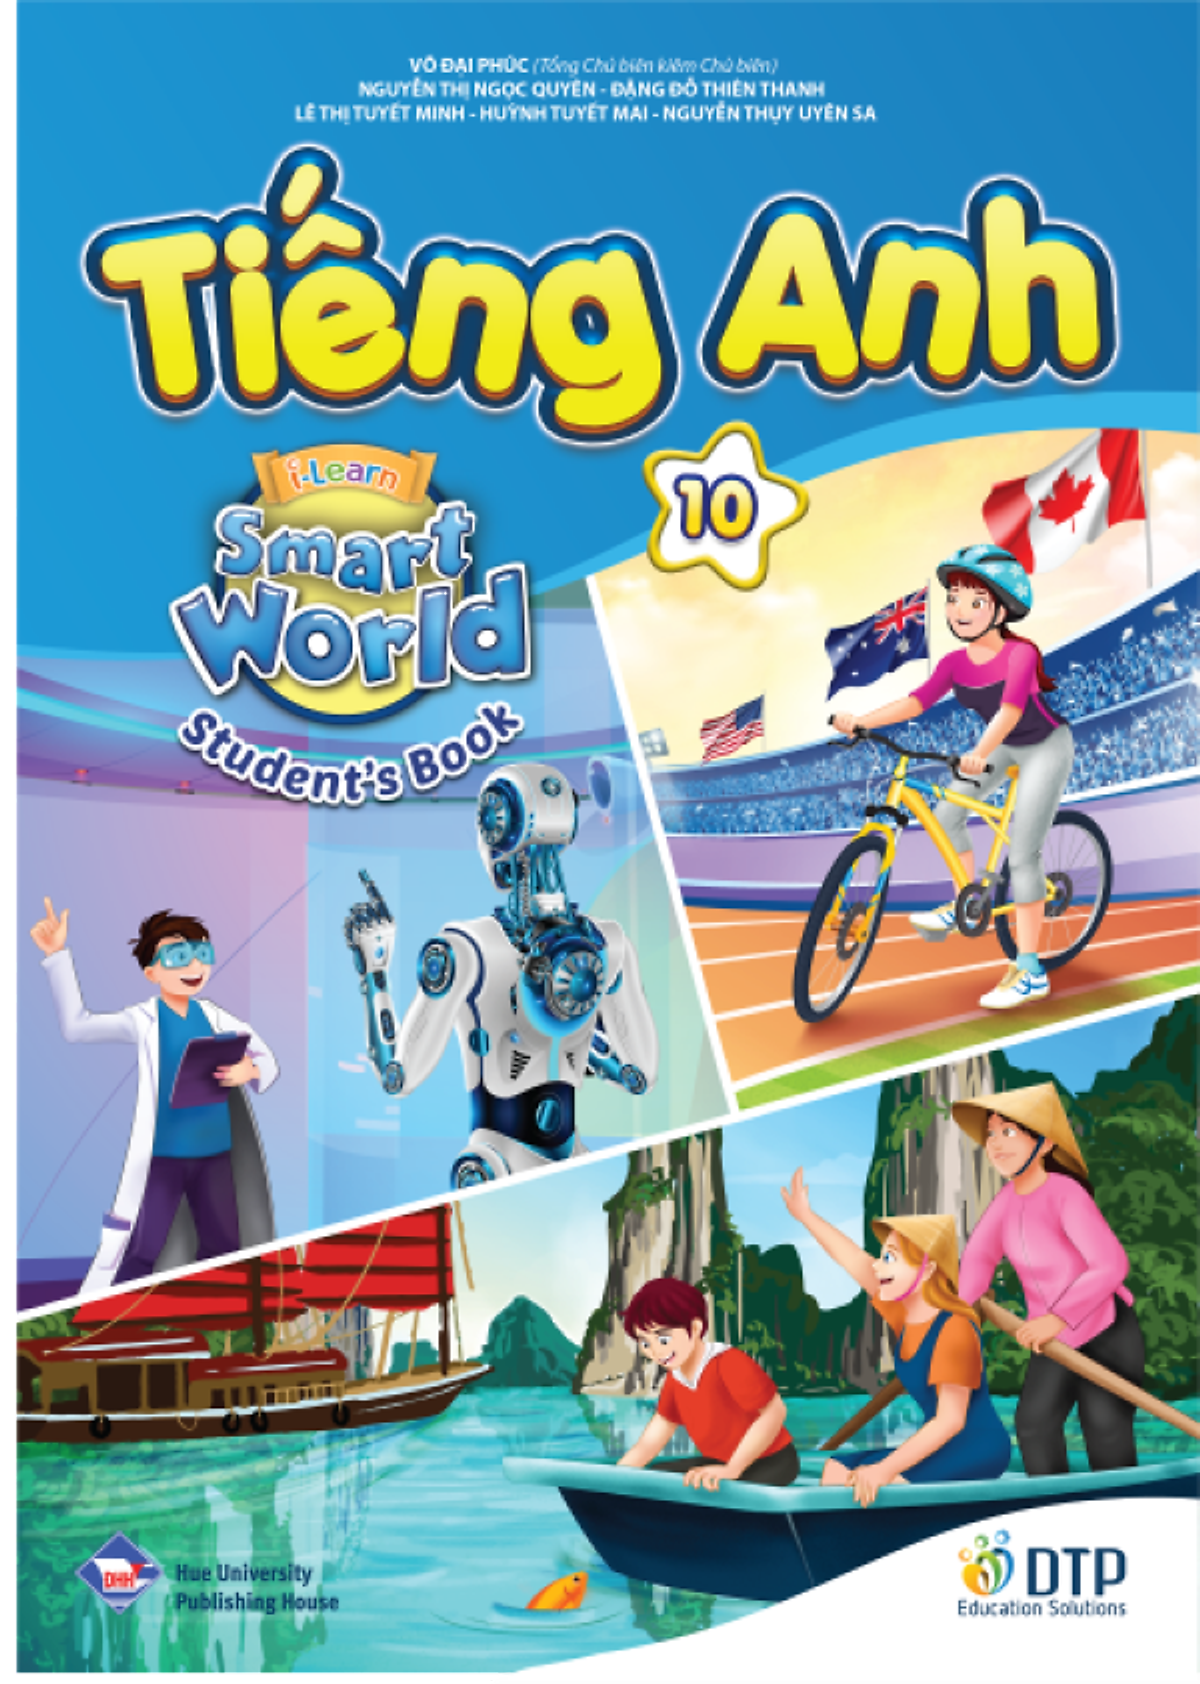 Tiếng Anh 10 i-Learn Smart World Student's Book (Sách học sinh)